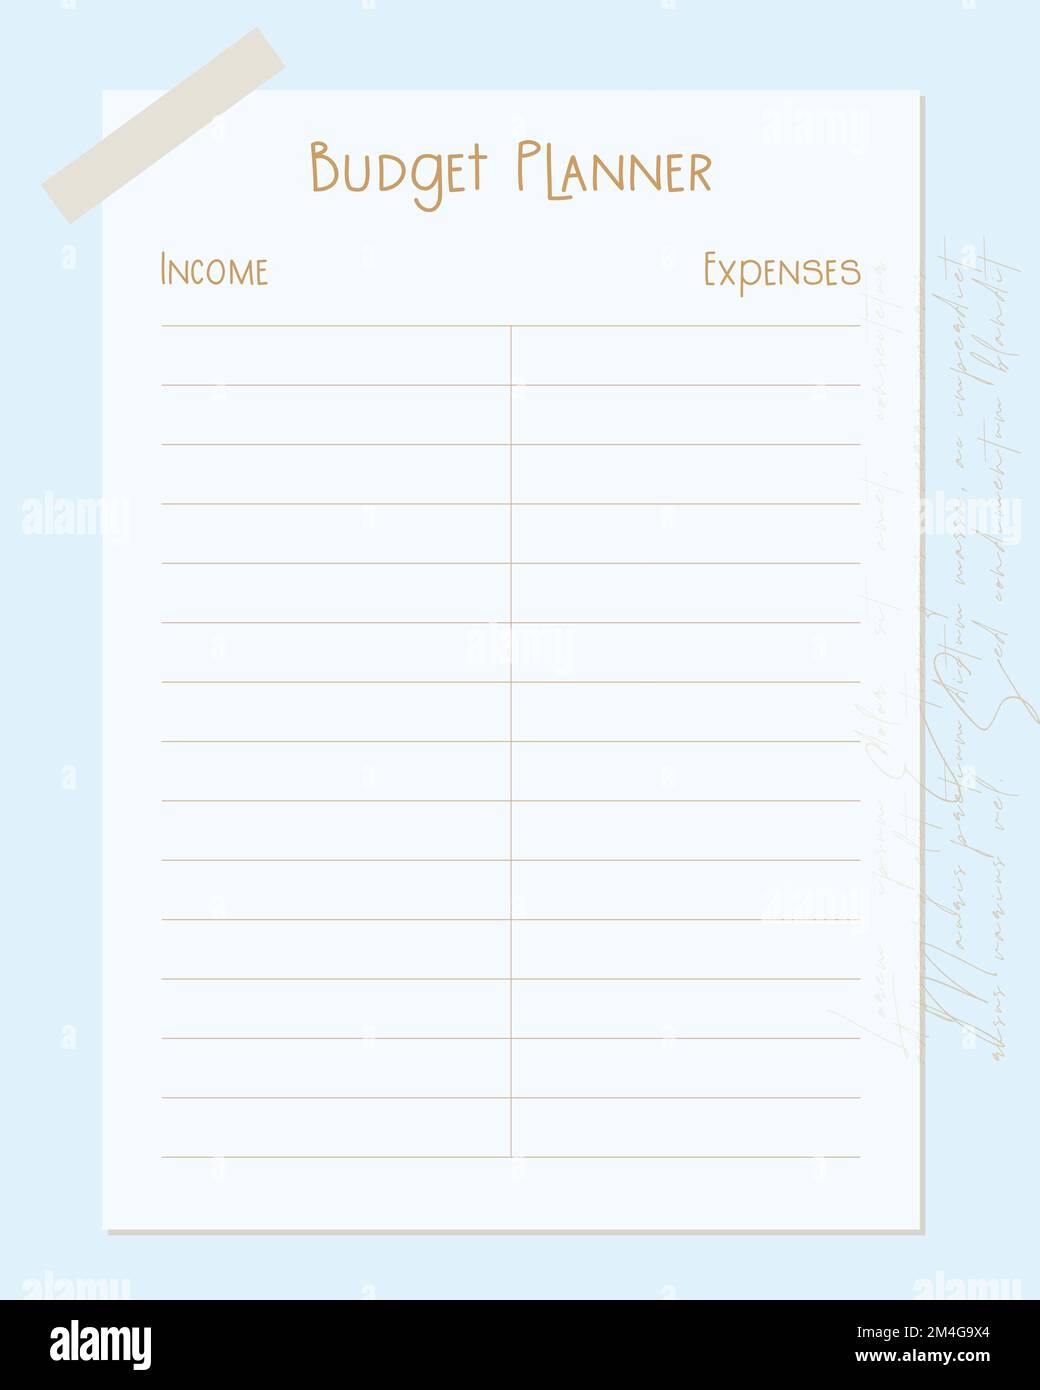 Budget planner template blue page design collage scrapbooking vintage style, income and expenses. Vector illustration Stock Vector